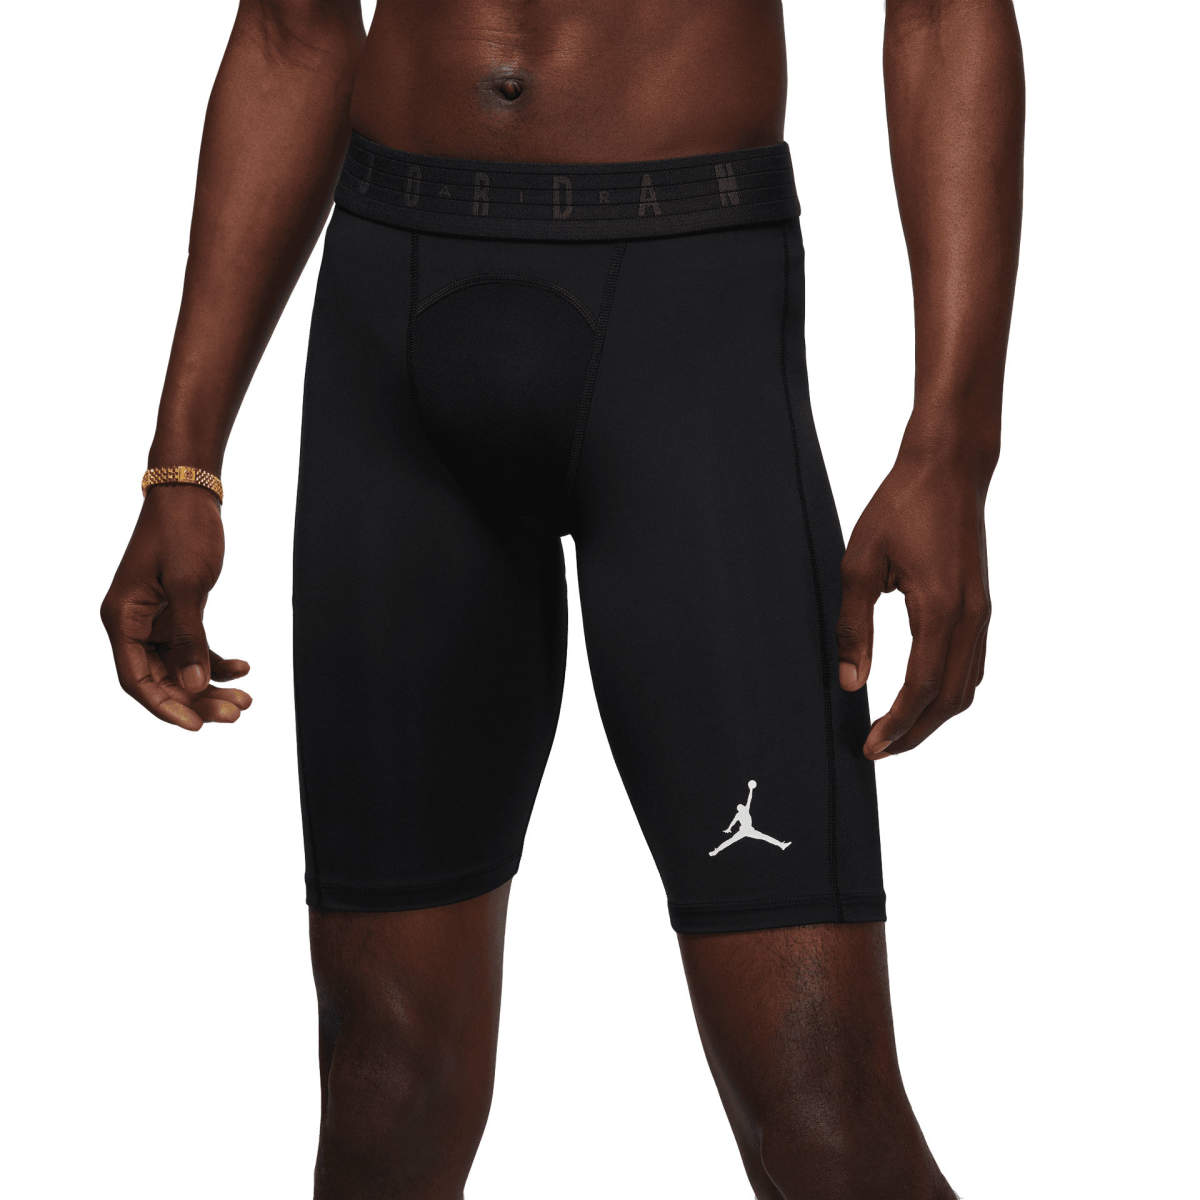 Mens Shorts Men Running Compression Sweatpants Gym Jogging Leggings  Basketball Football Shorts Fitness Tight Pants Outdoor Sport Clothes Set  P230505 From Musuo03, $17.16